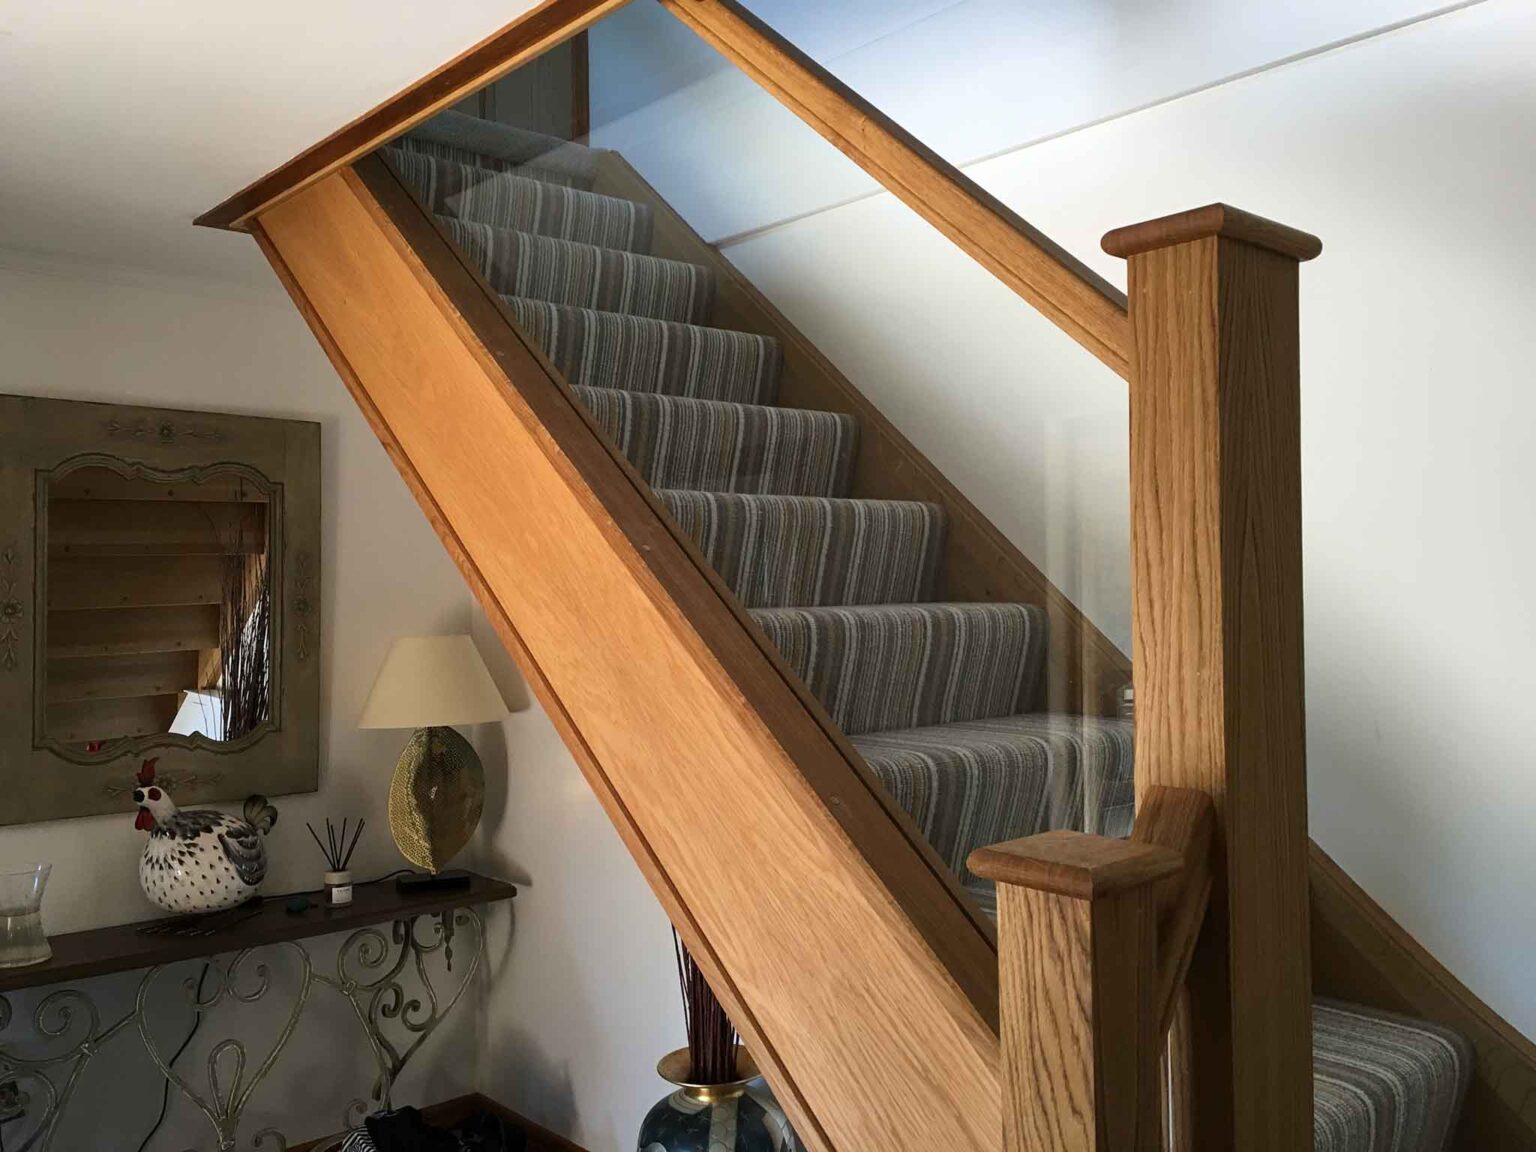 Staircase with waterfall stripe carpet completed in Oak by One Stop Joinery with Oak wood and toughened safety glass.